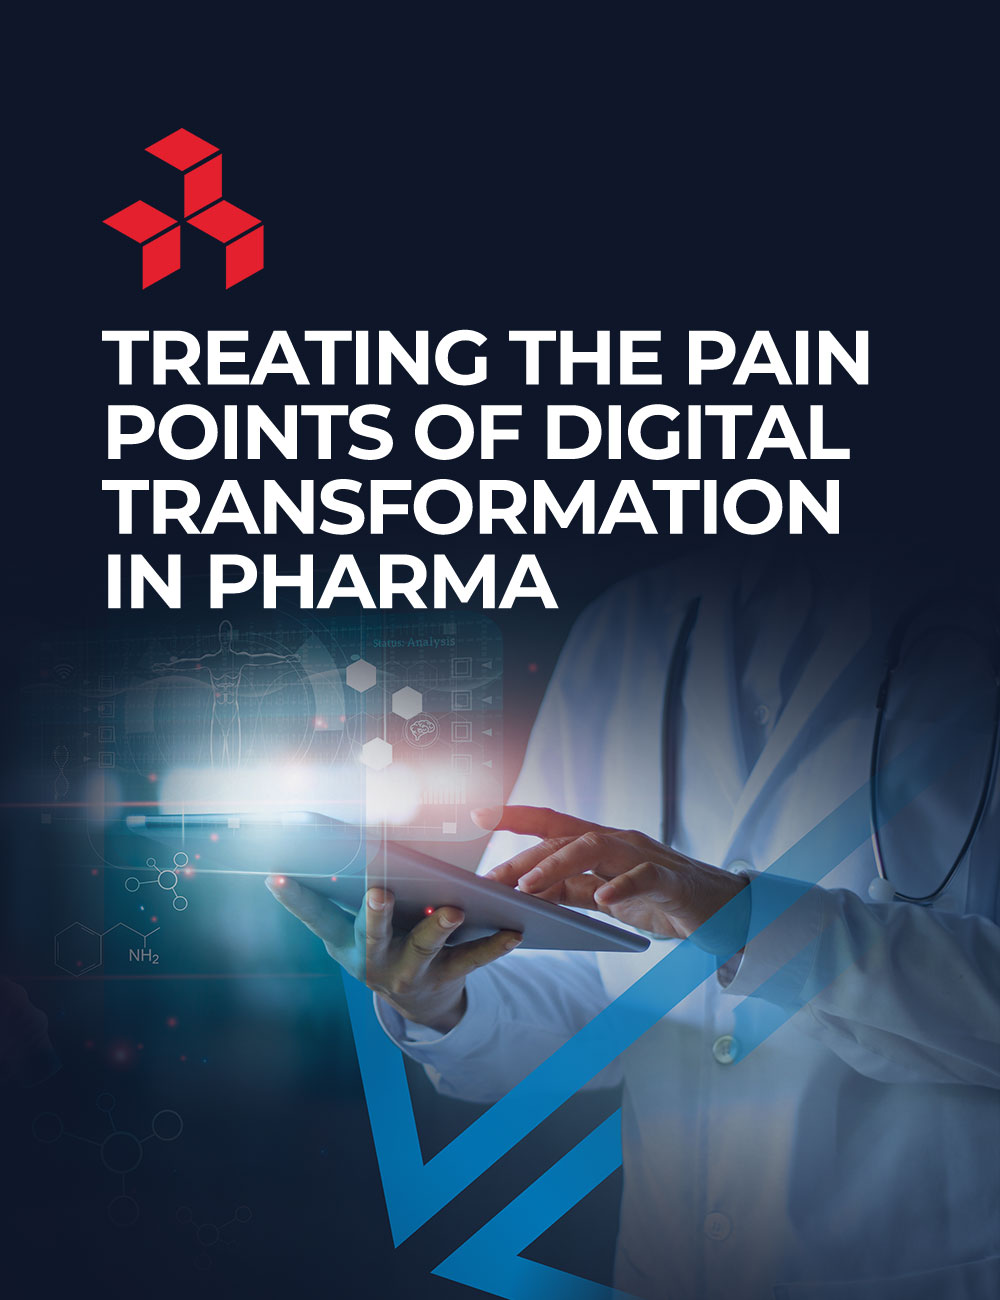 Treating the Pain Points of Digital Transformation in Pharma